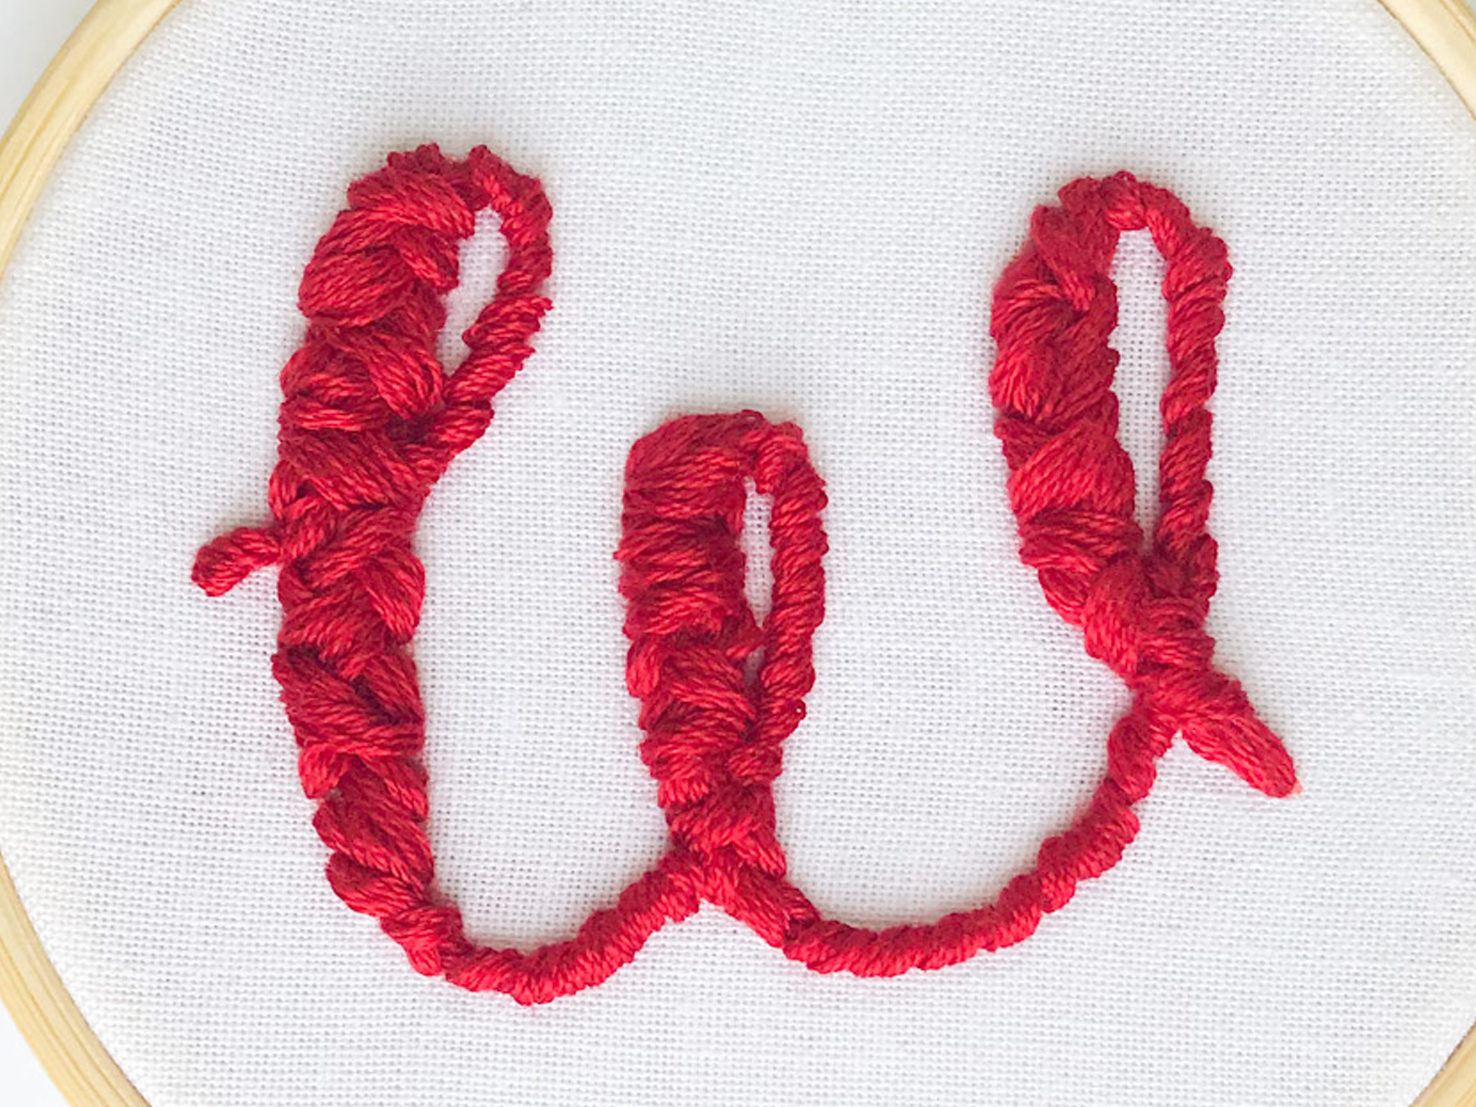 The letter "w" filled with a puff stitch. 